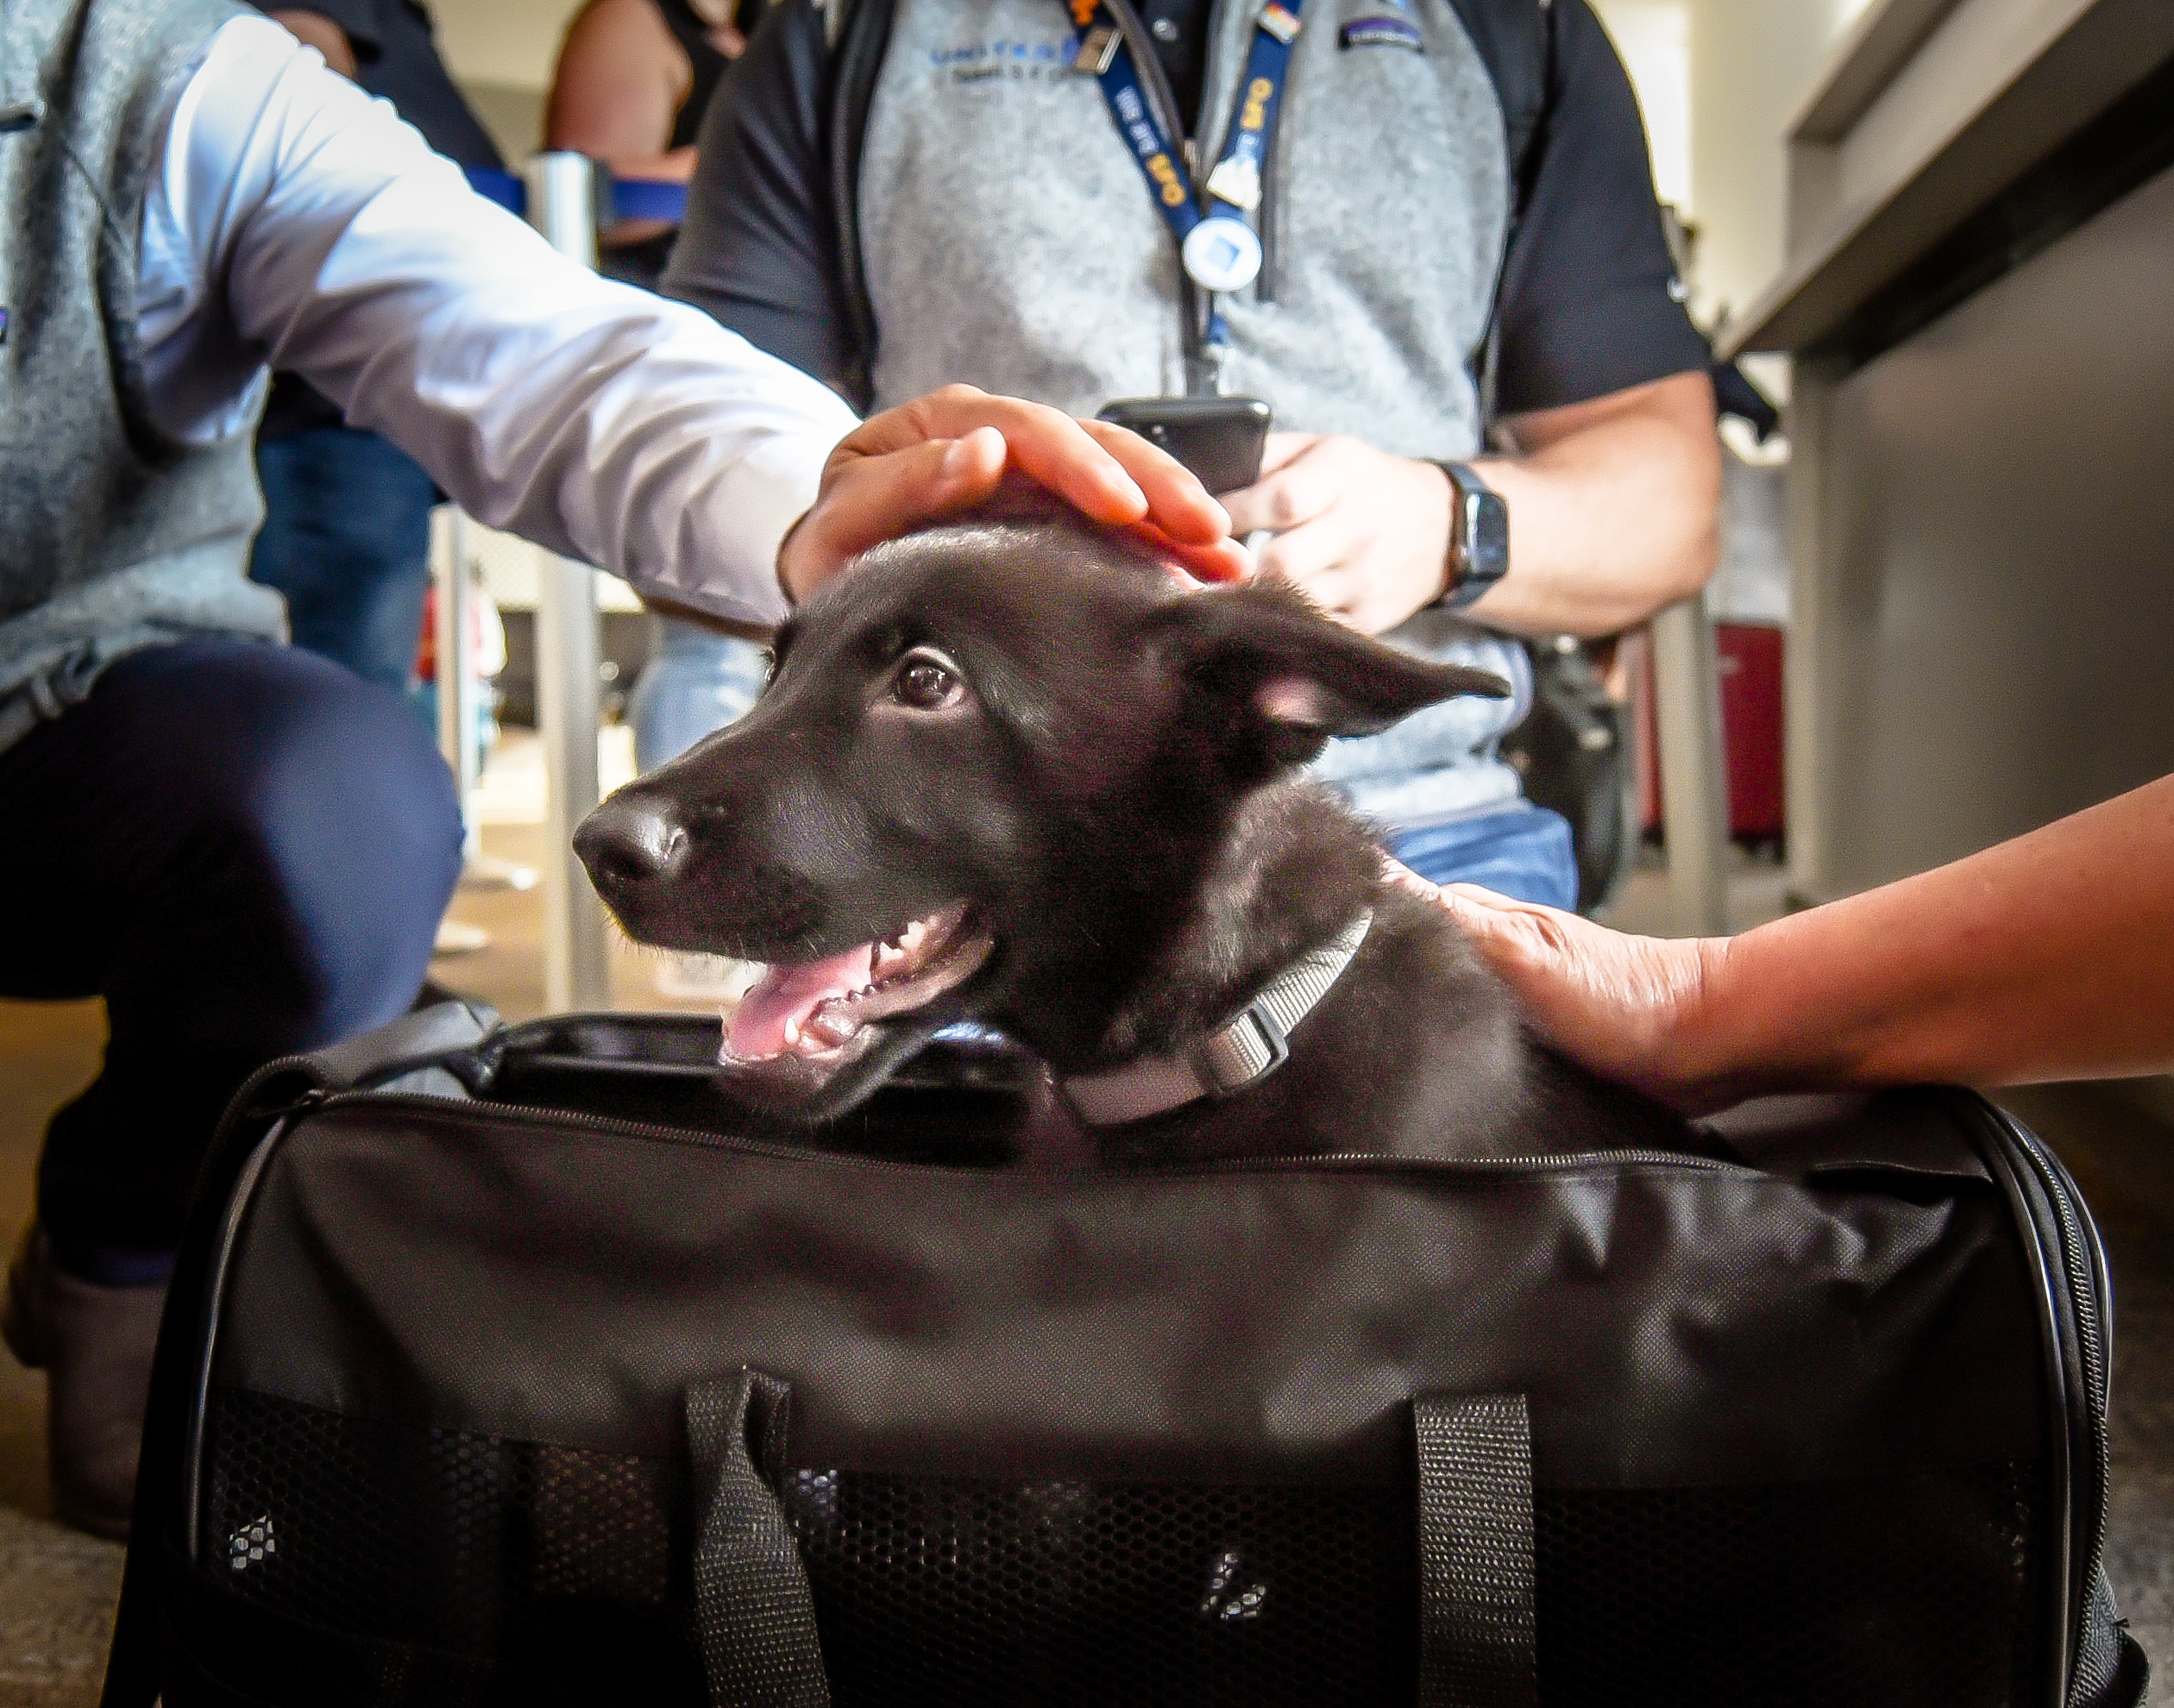 Polaris the puppy getting pets from United Airlines employees